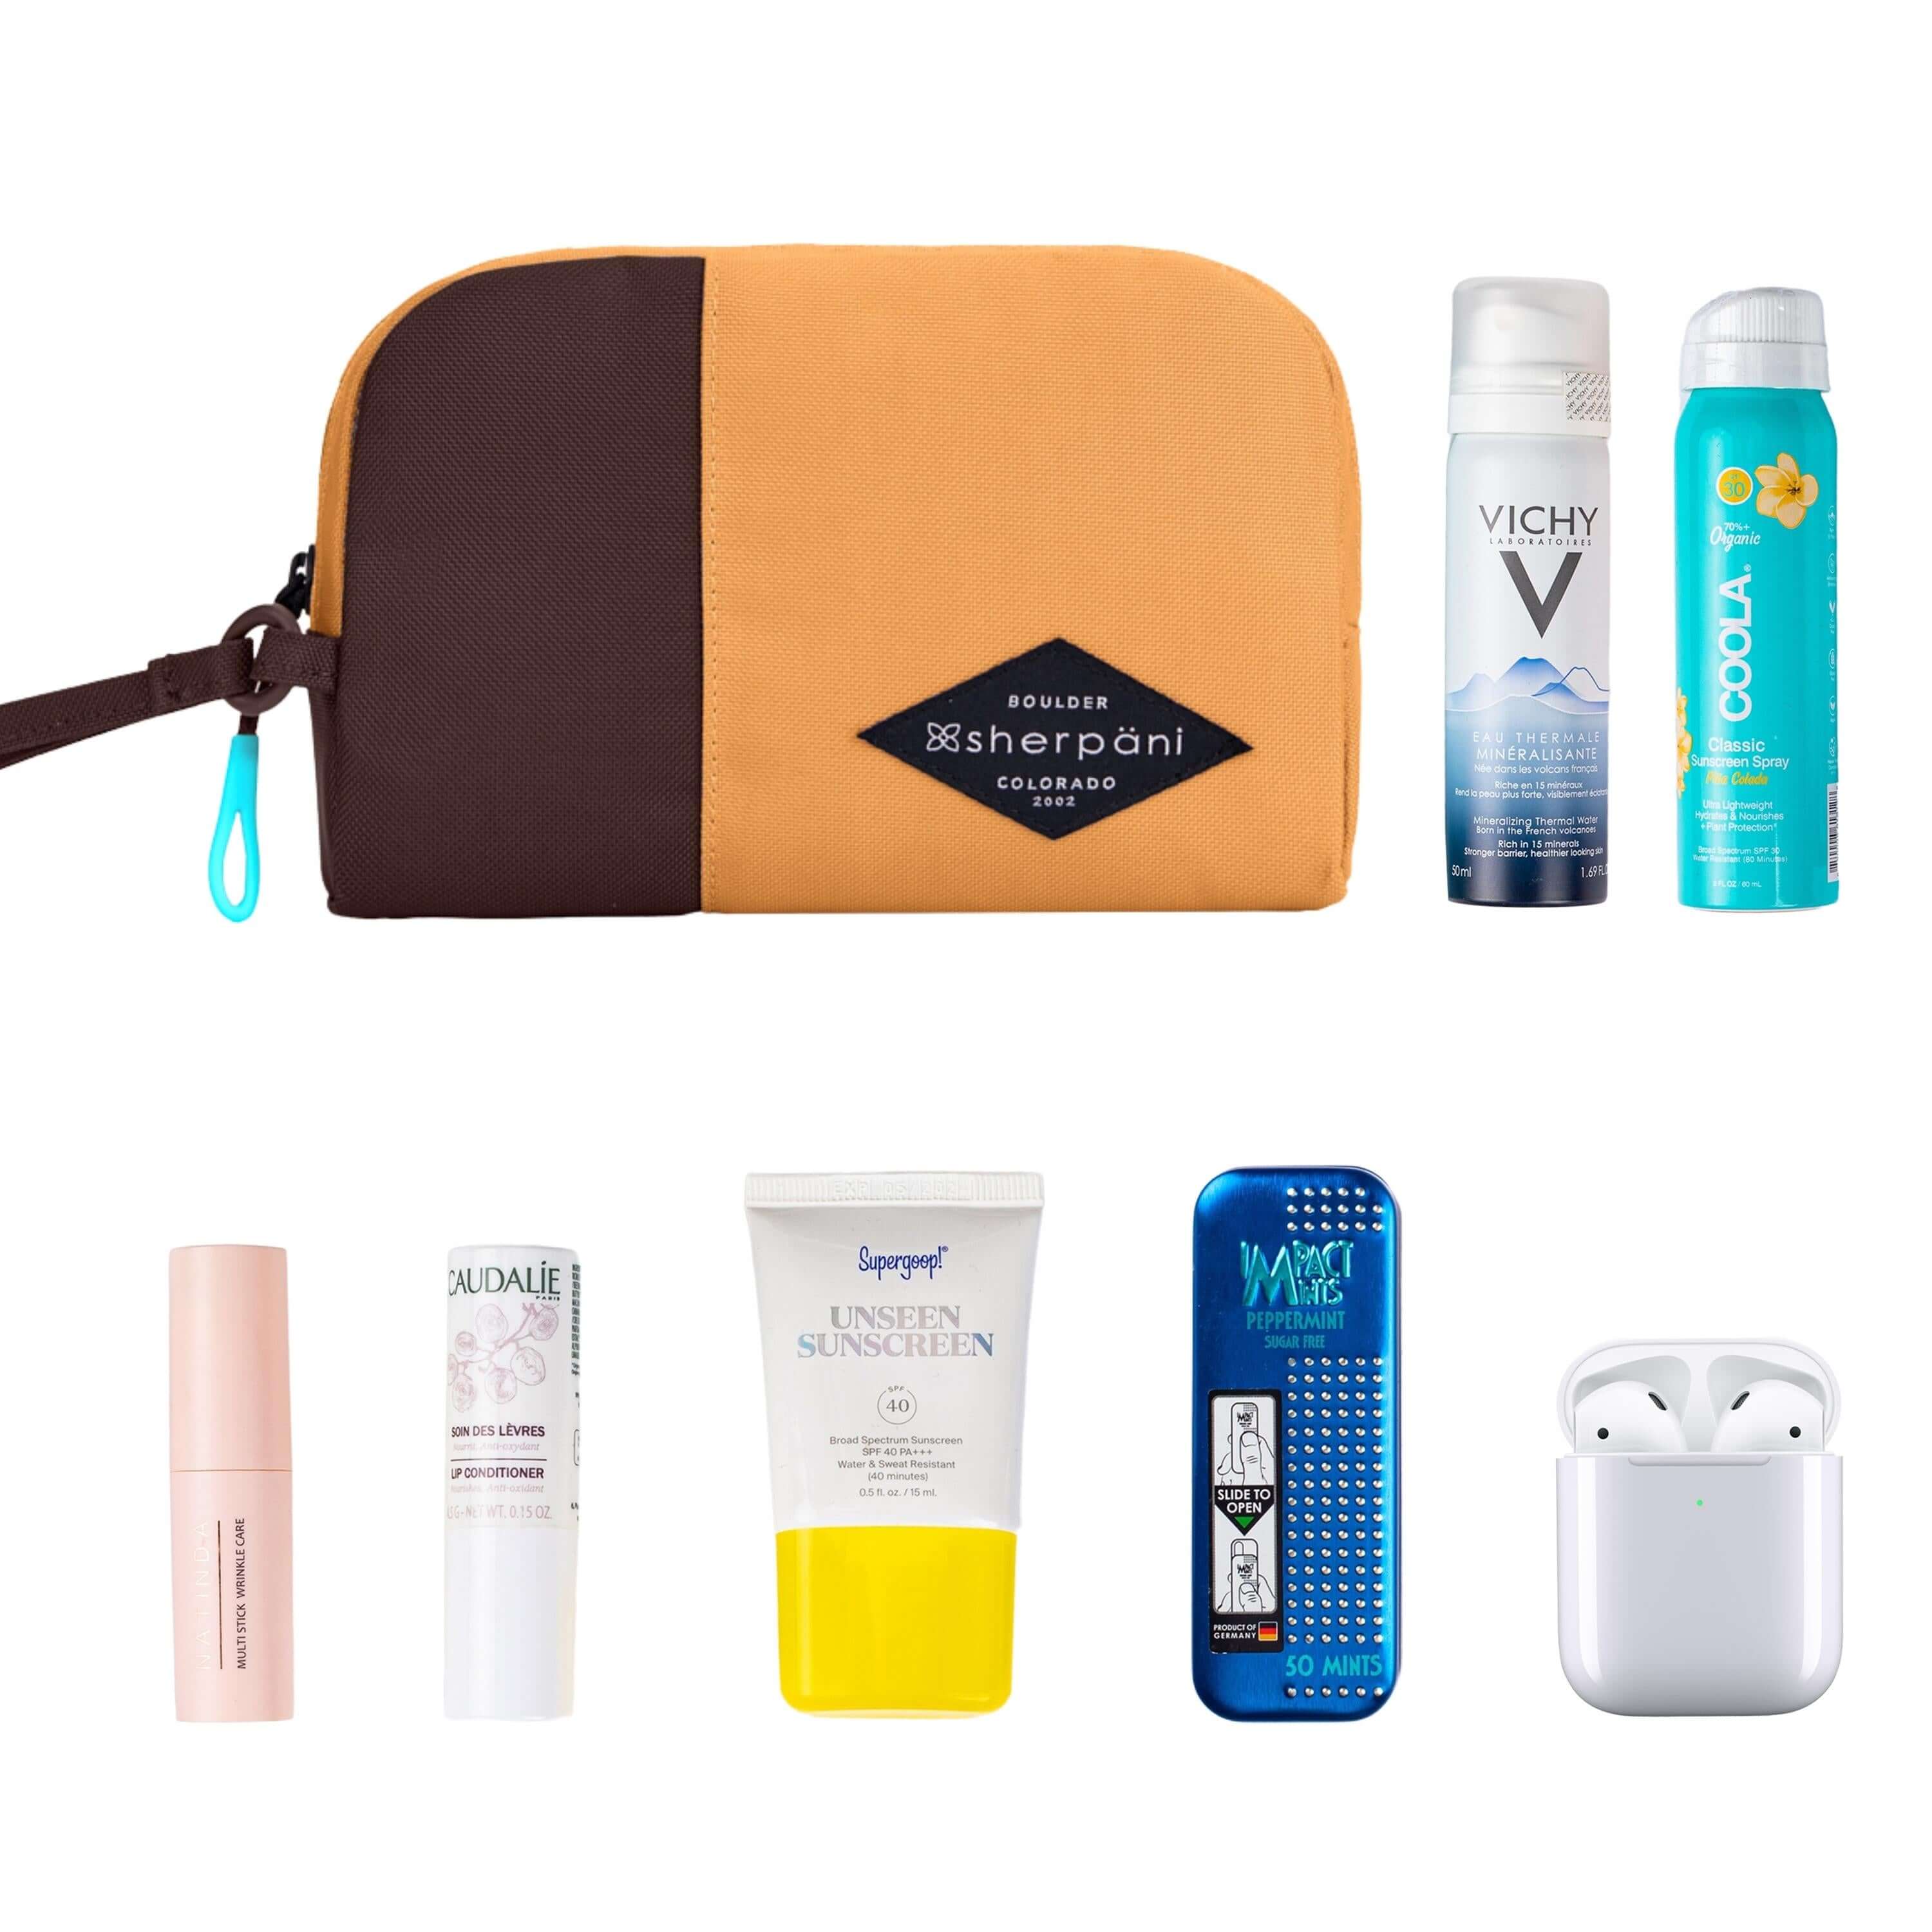 Top view of example items to fill the bag. Sherpani travel accessory, the Jolie in Sundial in medium size, lies in the upper left corner. It is surrounded by an assortment of items: beauty products, skincare products, sunscreen, mints and AirPods.